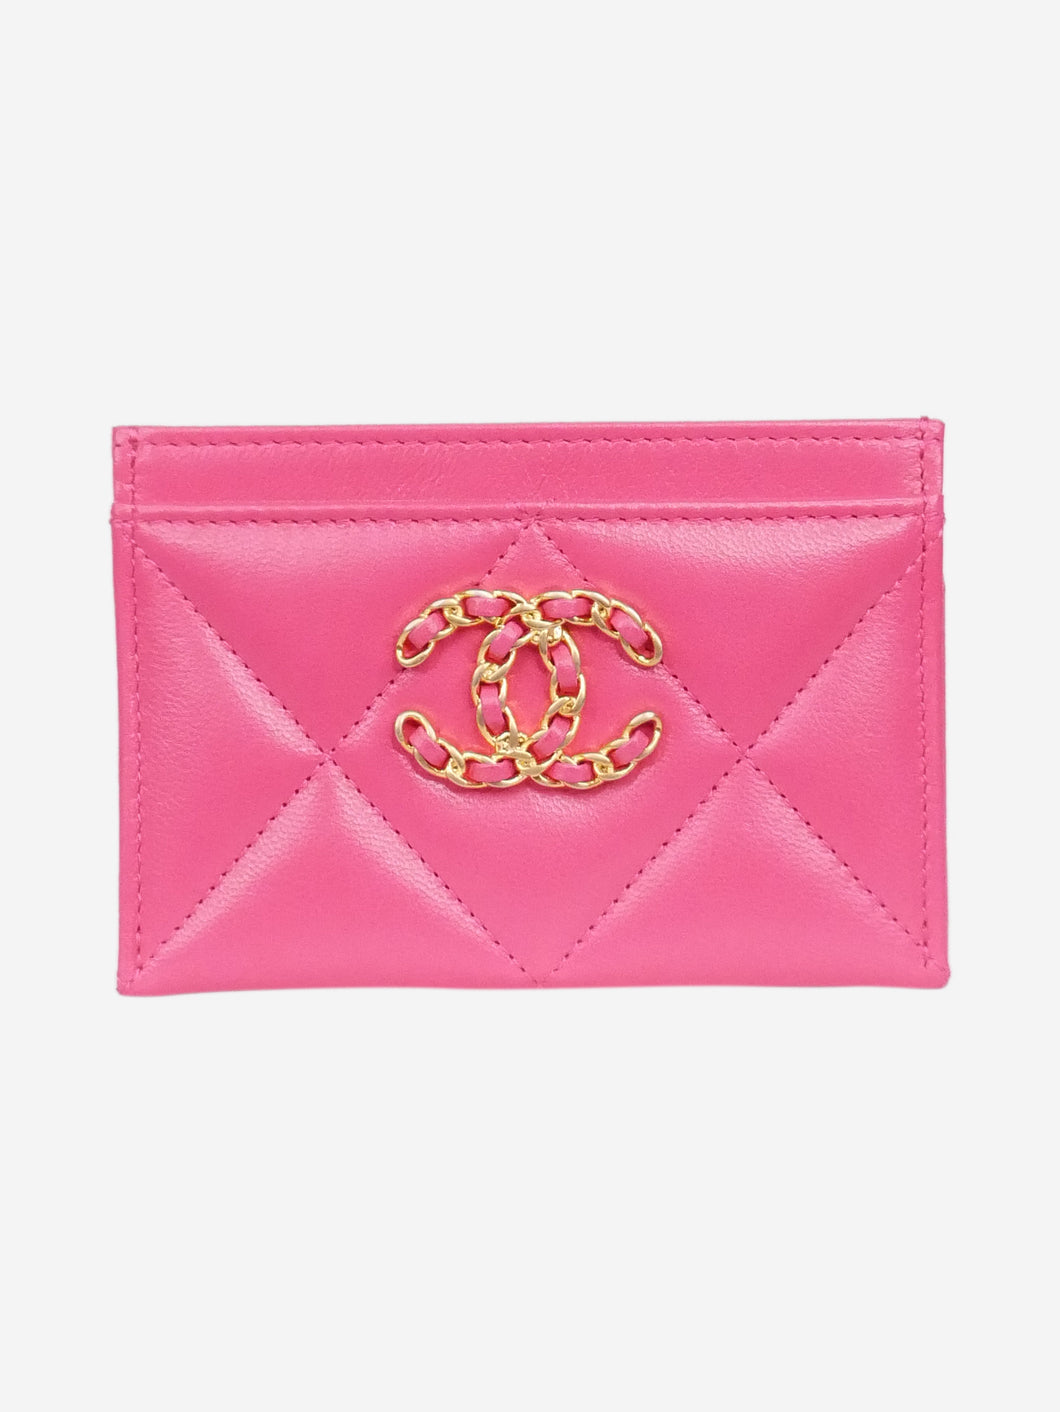 Pink 2020 19 leather card holder Wallets, Purses & Small Leather Goods Chanel 